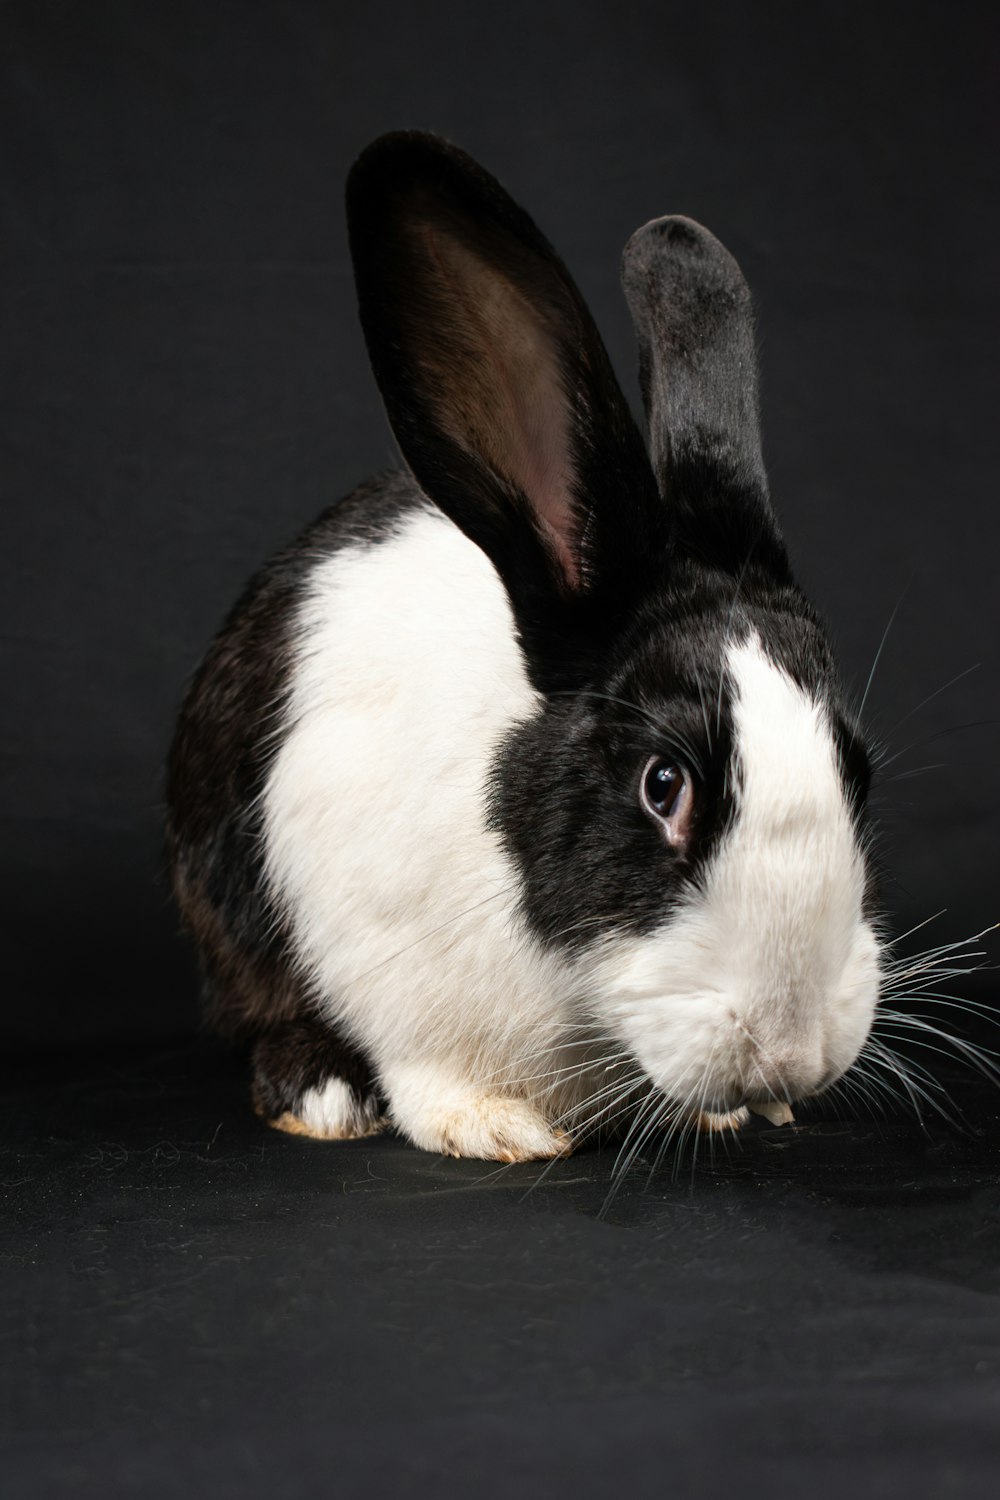 a black and white rabbit sitting on a black surface